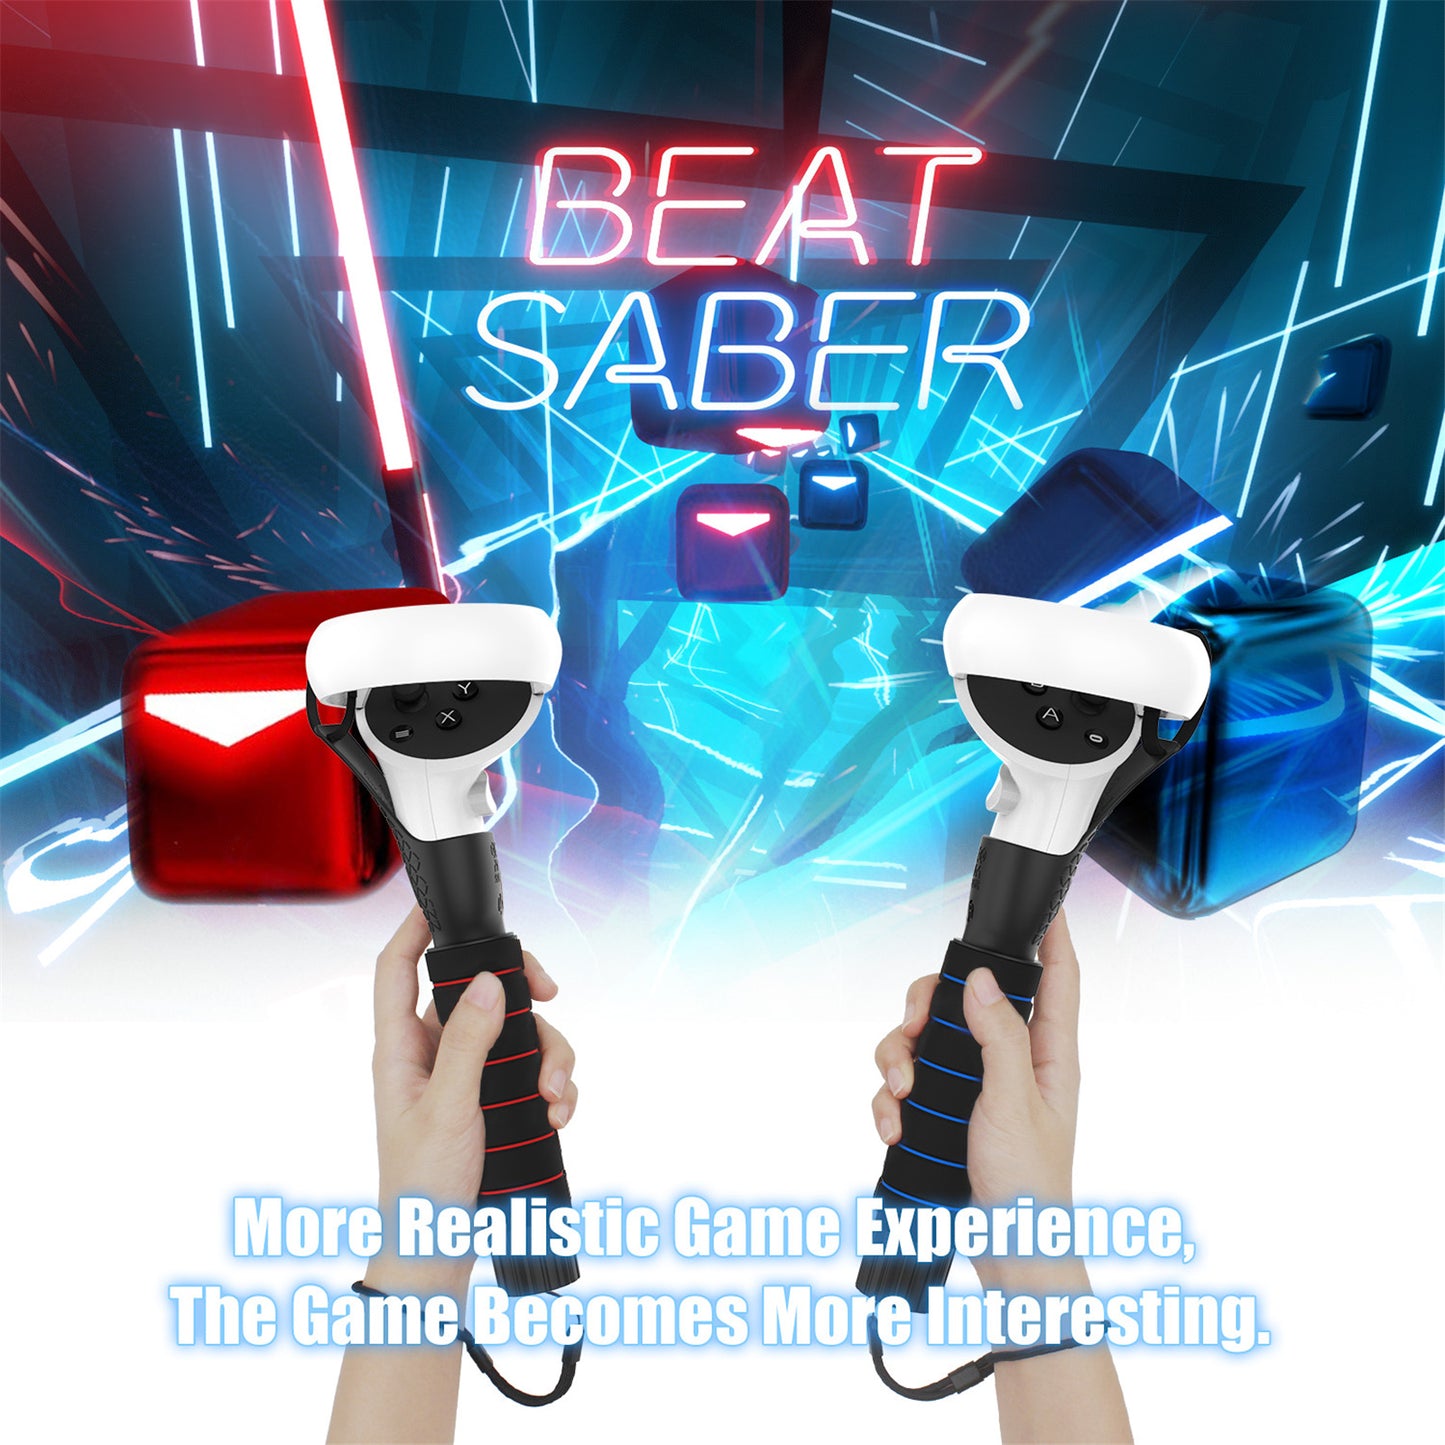 New Dual Handles Extension Grips For Oculus Quest, Oculus Quest 2 , Rift S Vr Controllers Playing Beat Saber Game Accessories